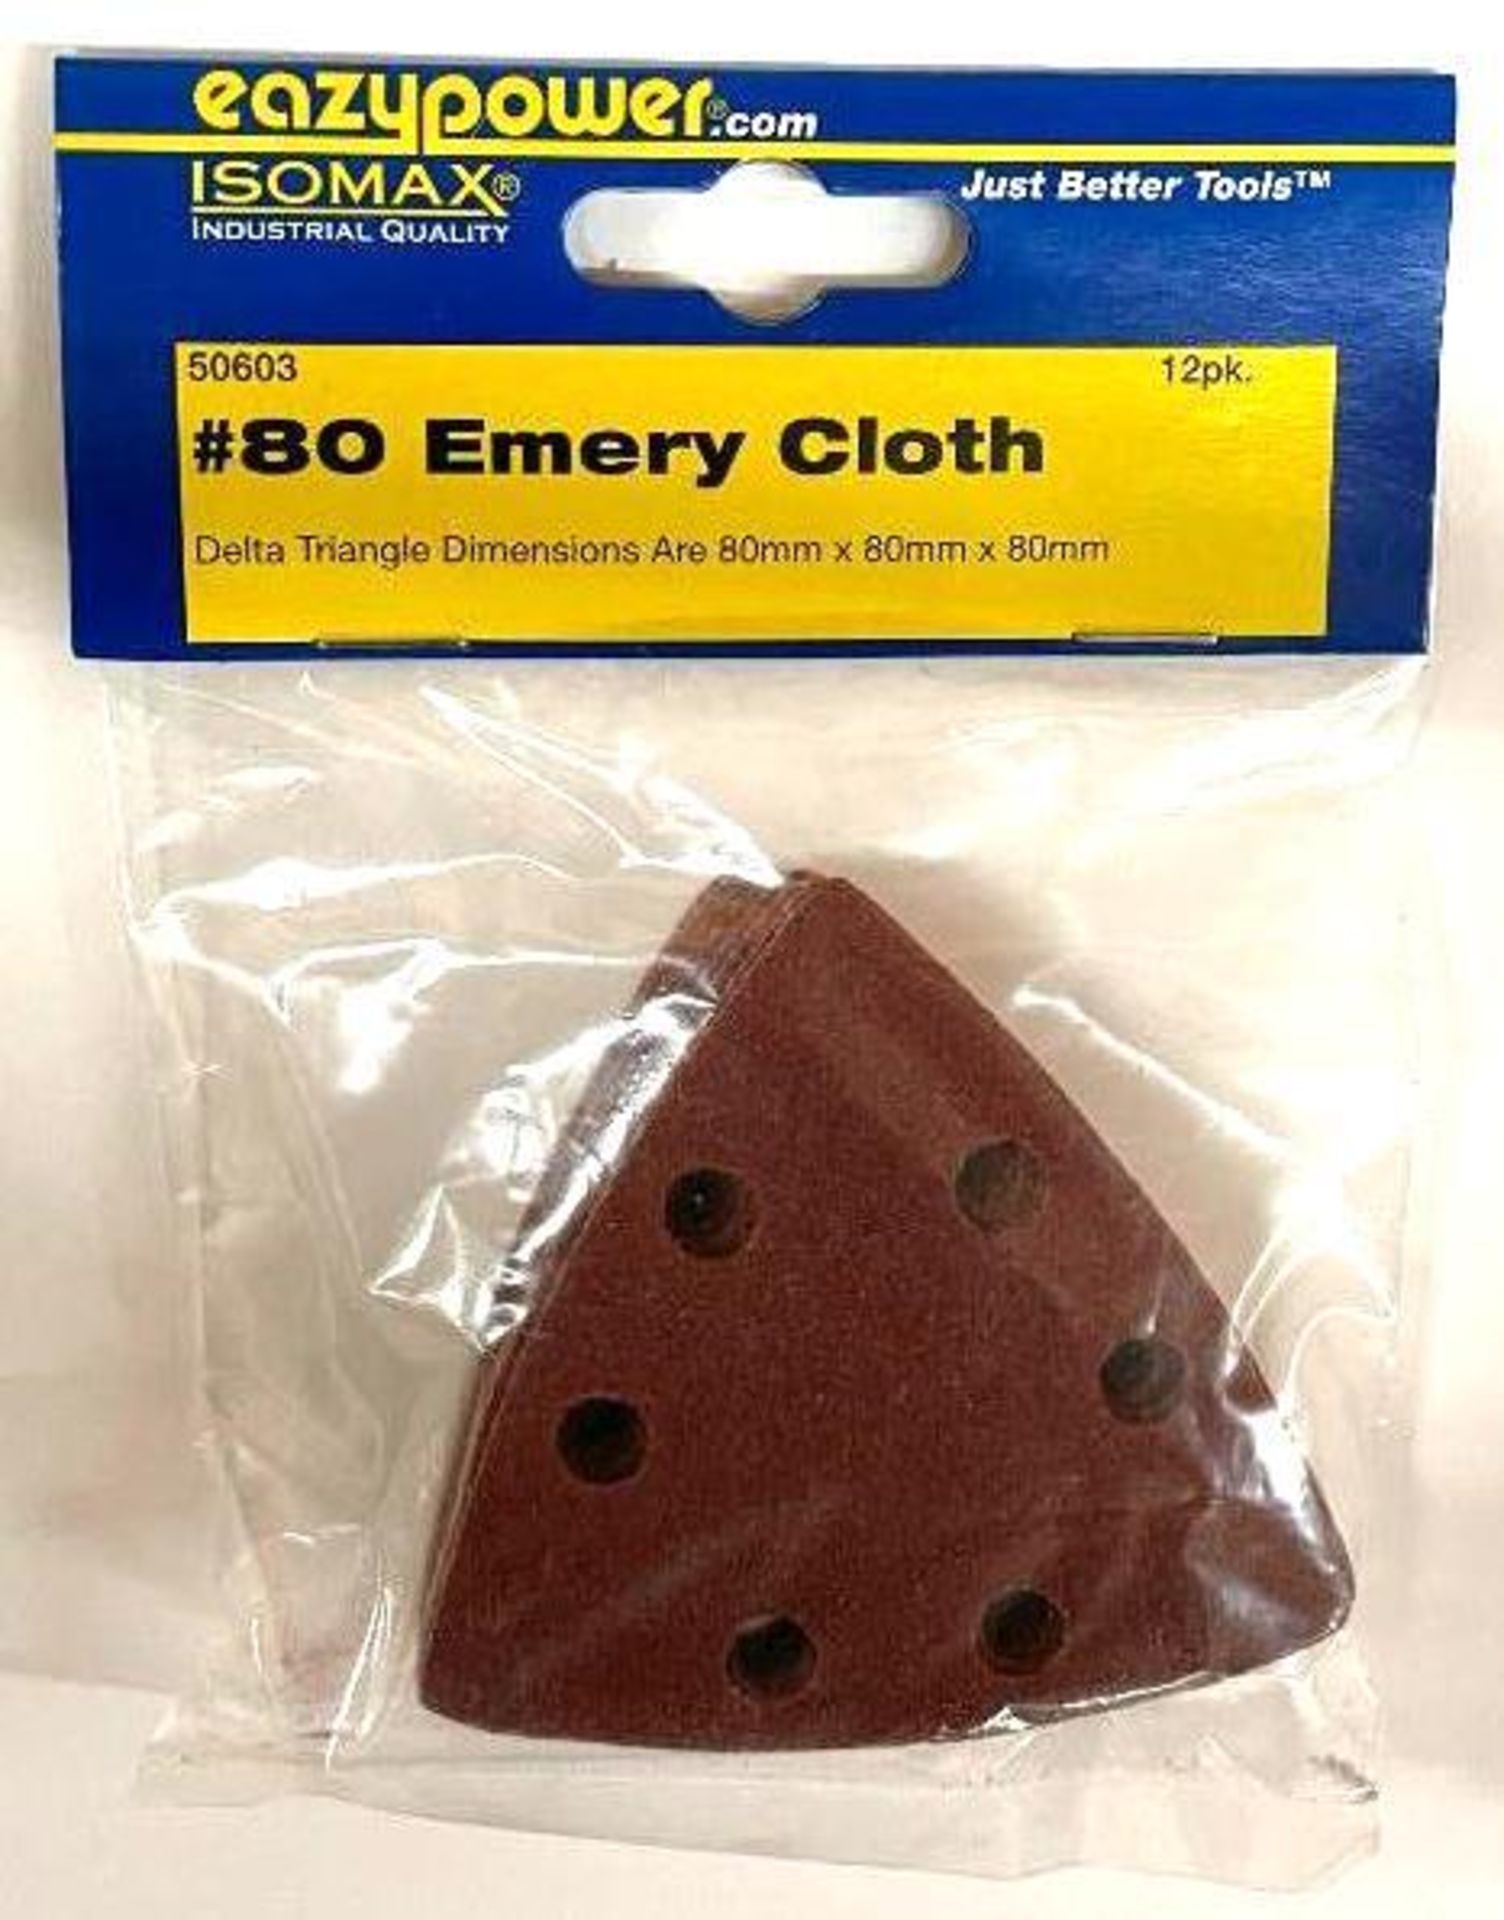 DESCRIPTION (200) 12CT PACKS OF #80 EMERY CLOTH BRAND/MODEL EAZY POWER 50603 THIS LOT IS ONE MONEY Q